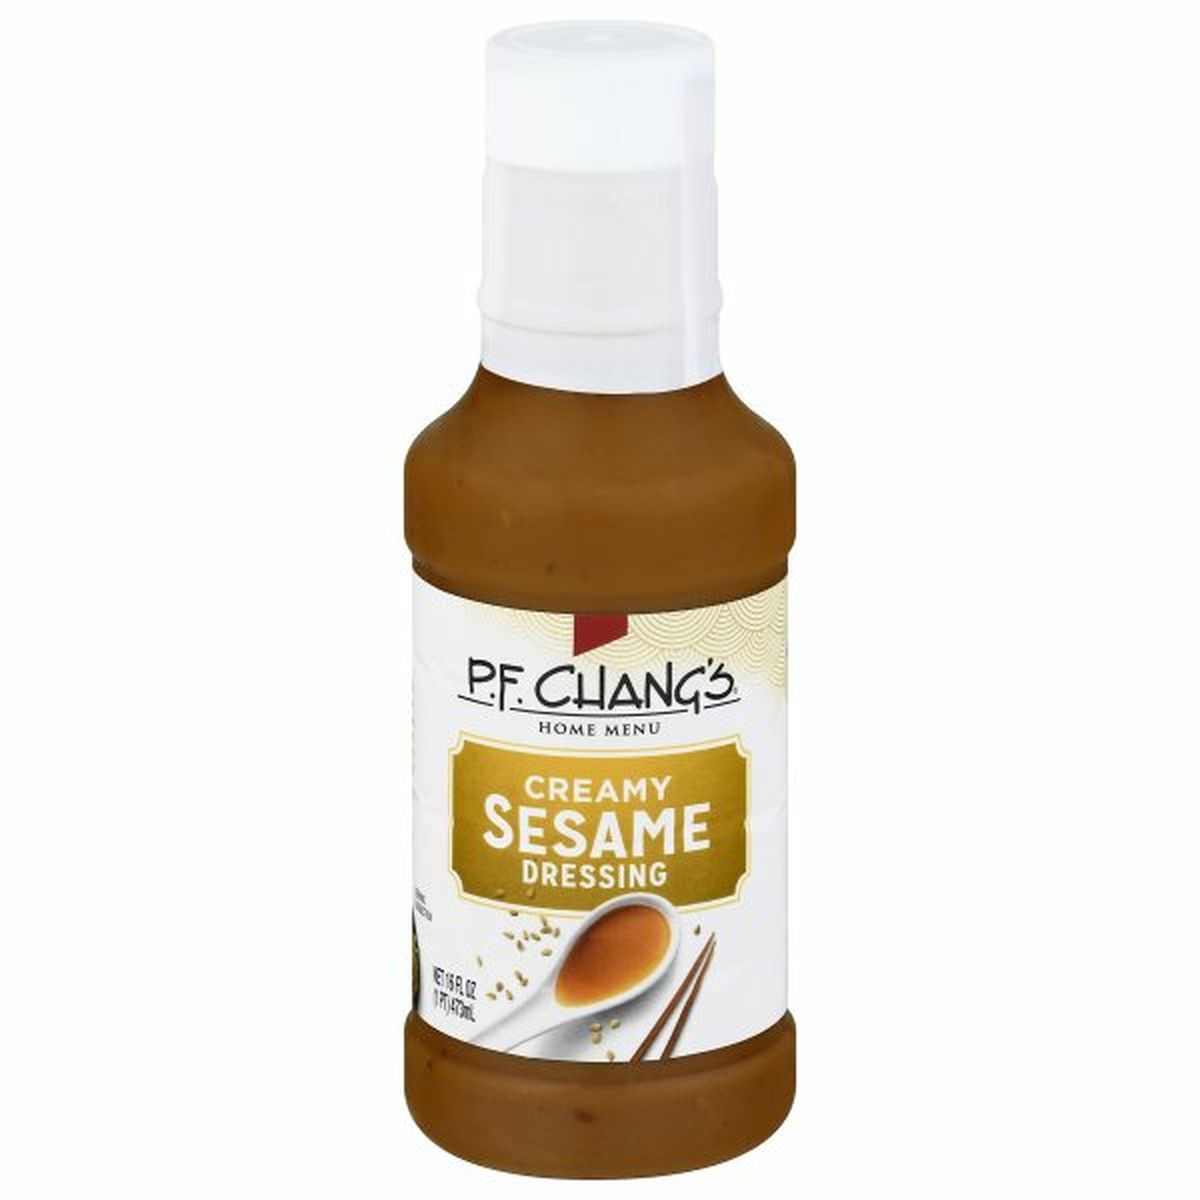 Calories in P.F. Chang's Dressing, Creamy Sesame